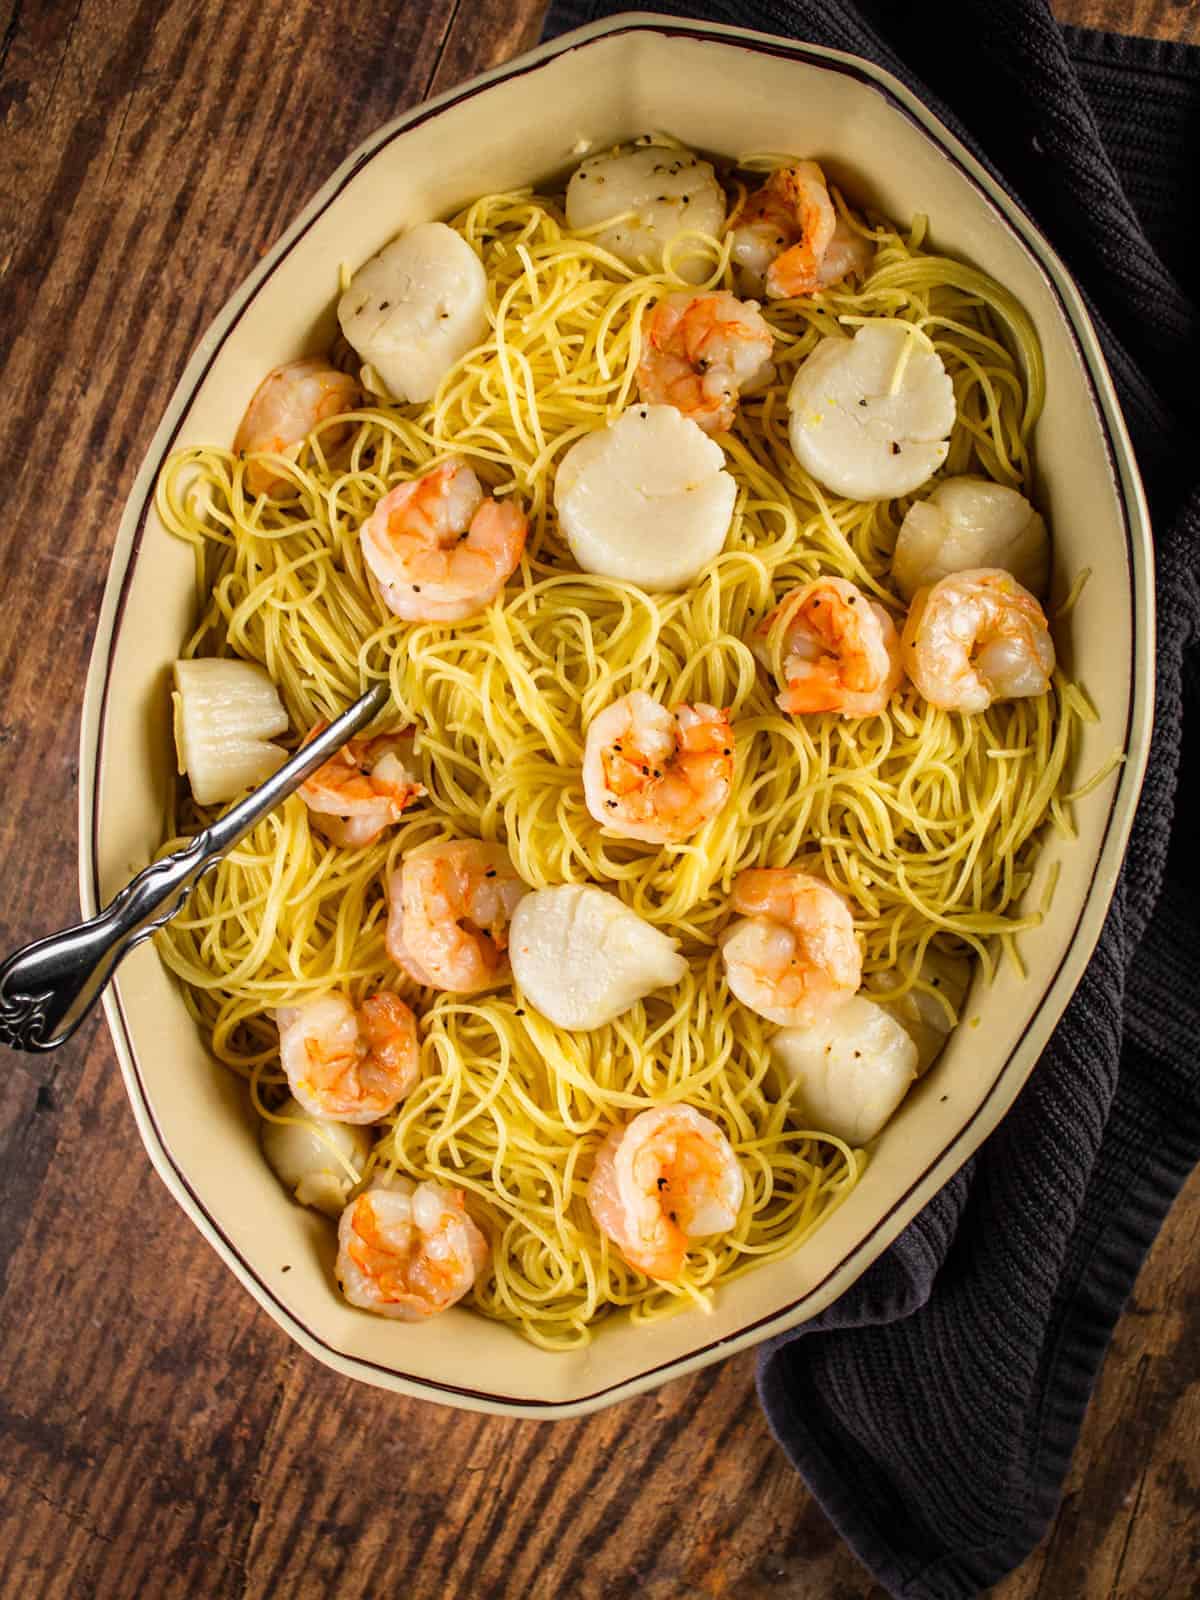 ceramic oval dish with roasted shrimp and scallops over angel hair pasta on a wooden table